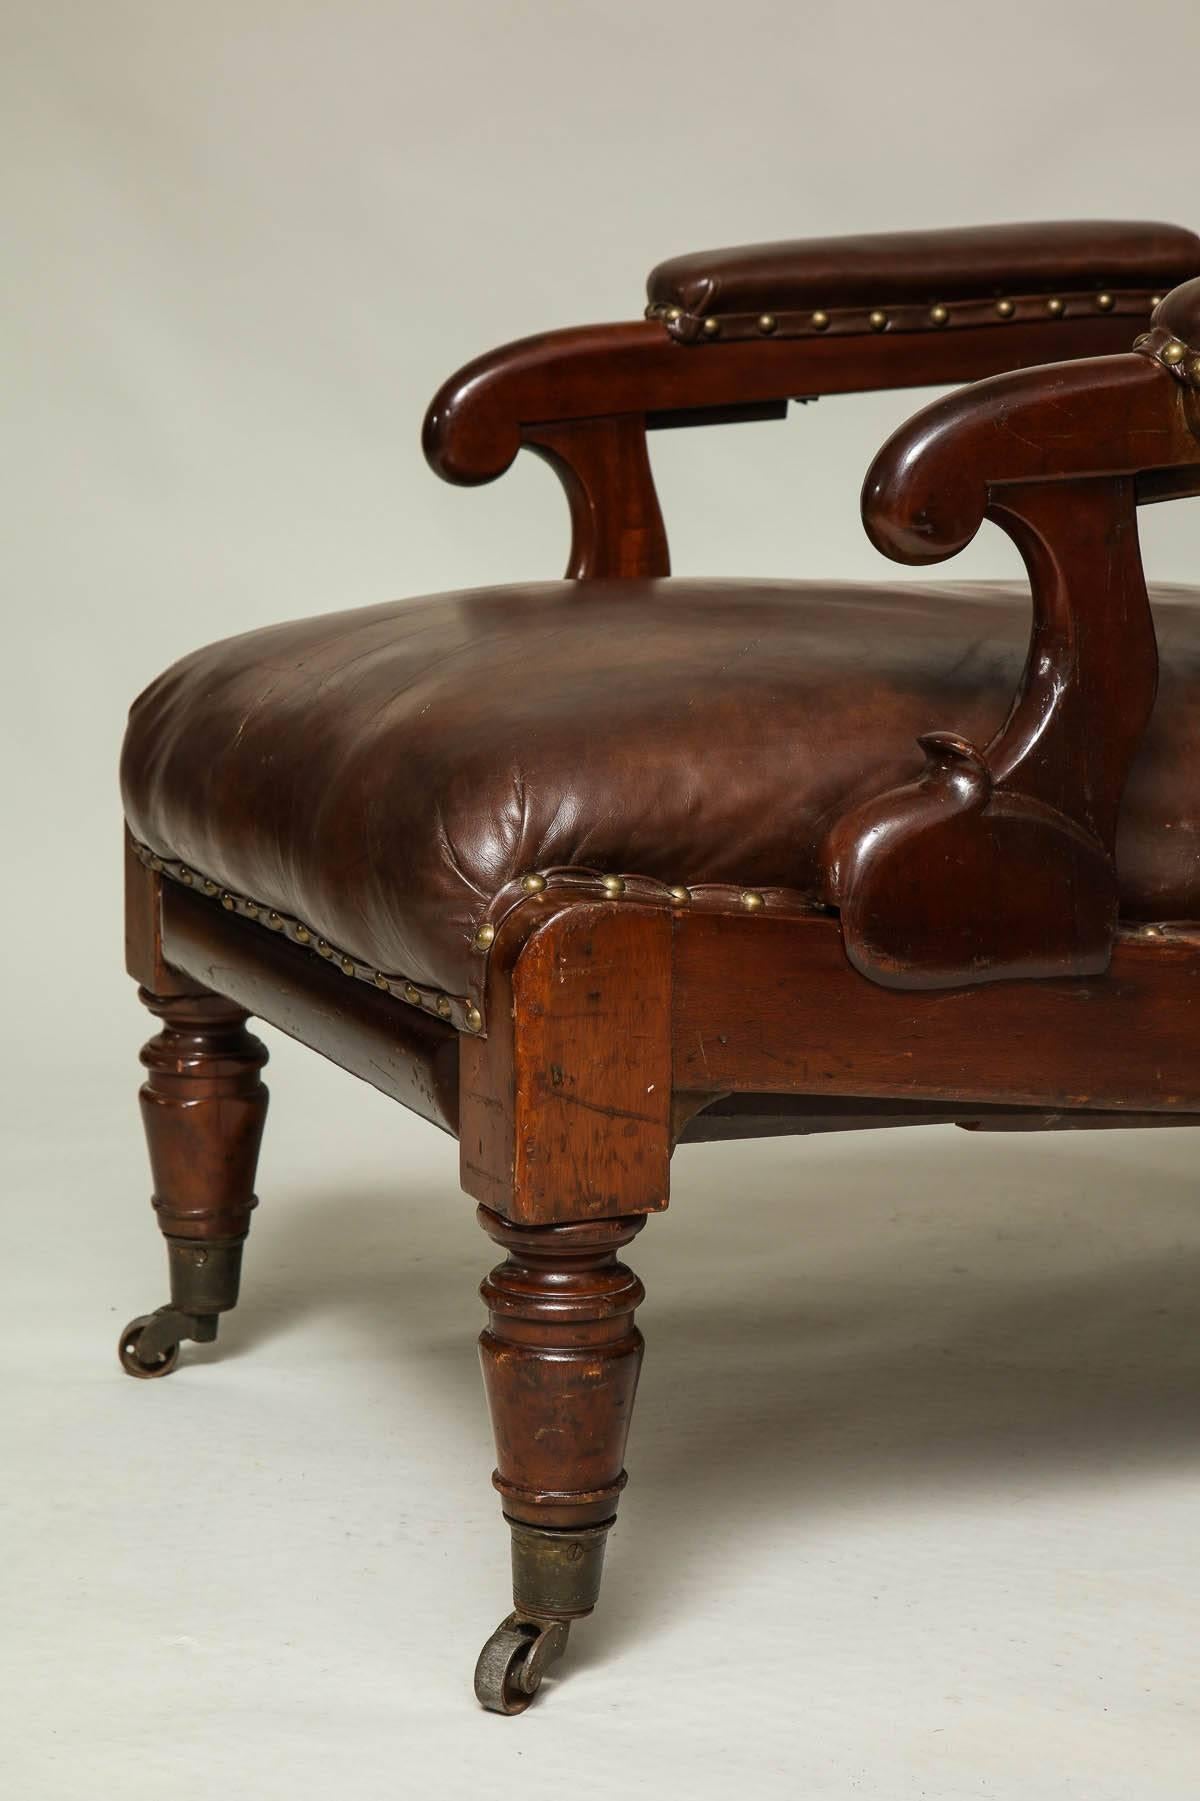 English William IV mahogany library chair with reclining back operated with brass pulls to the underside of the arms, as well as a pullout footrest. A comfortable and handsome chair, England, circa 1835.